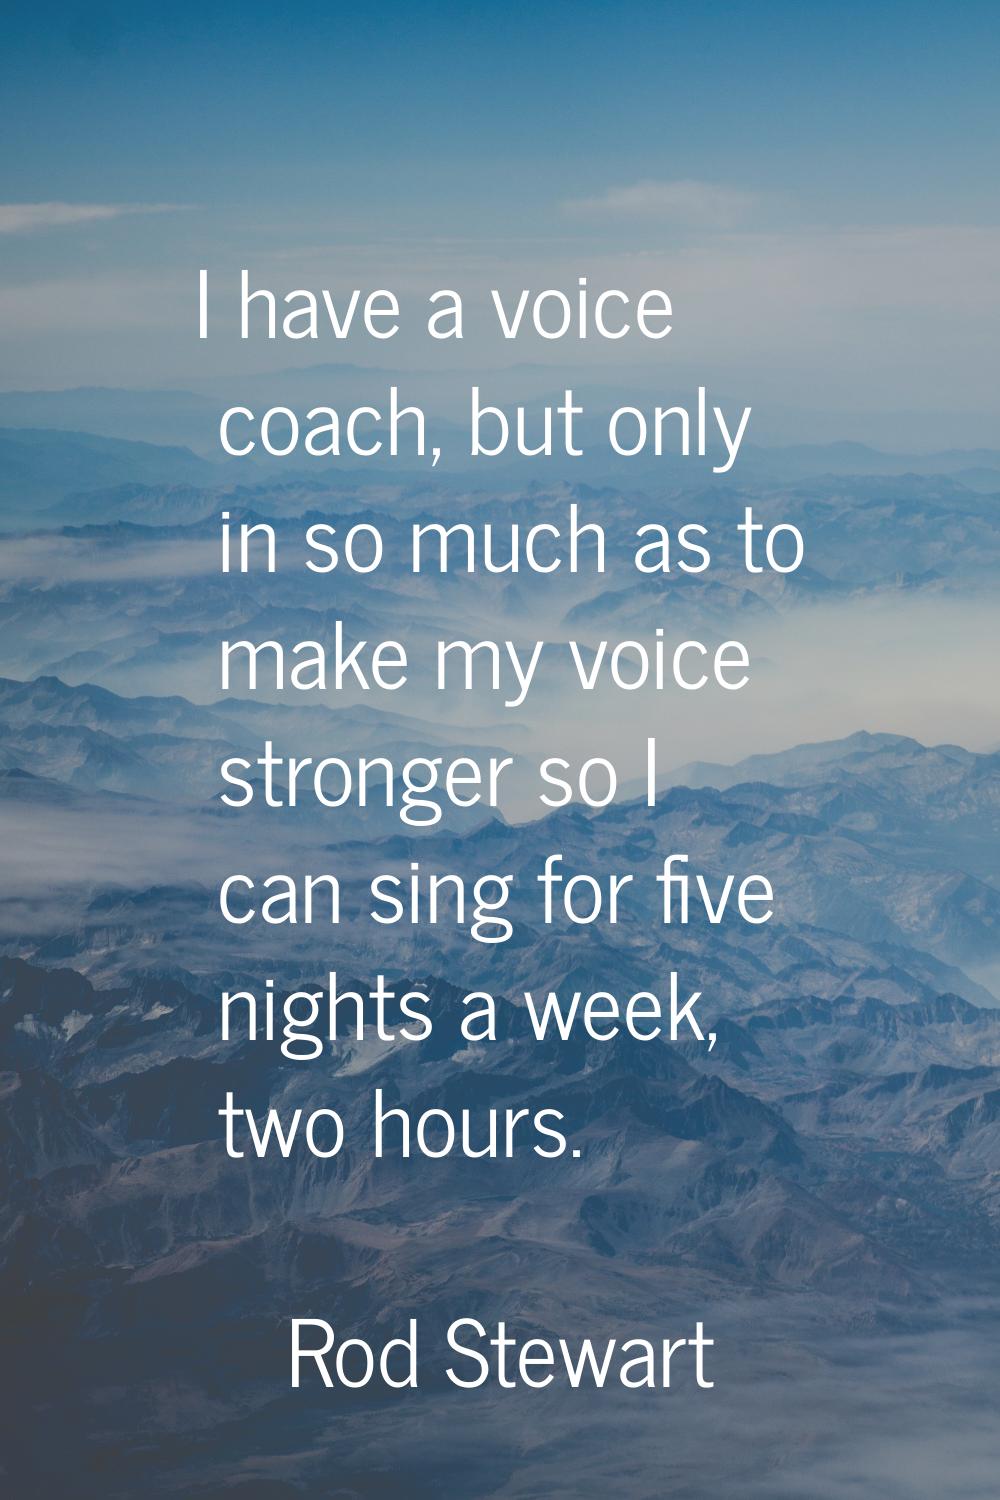 I have a voice coach, but only in so much as to make my voice stronger so I can sing for five night